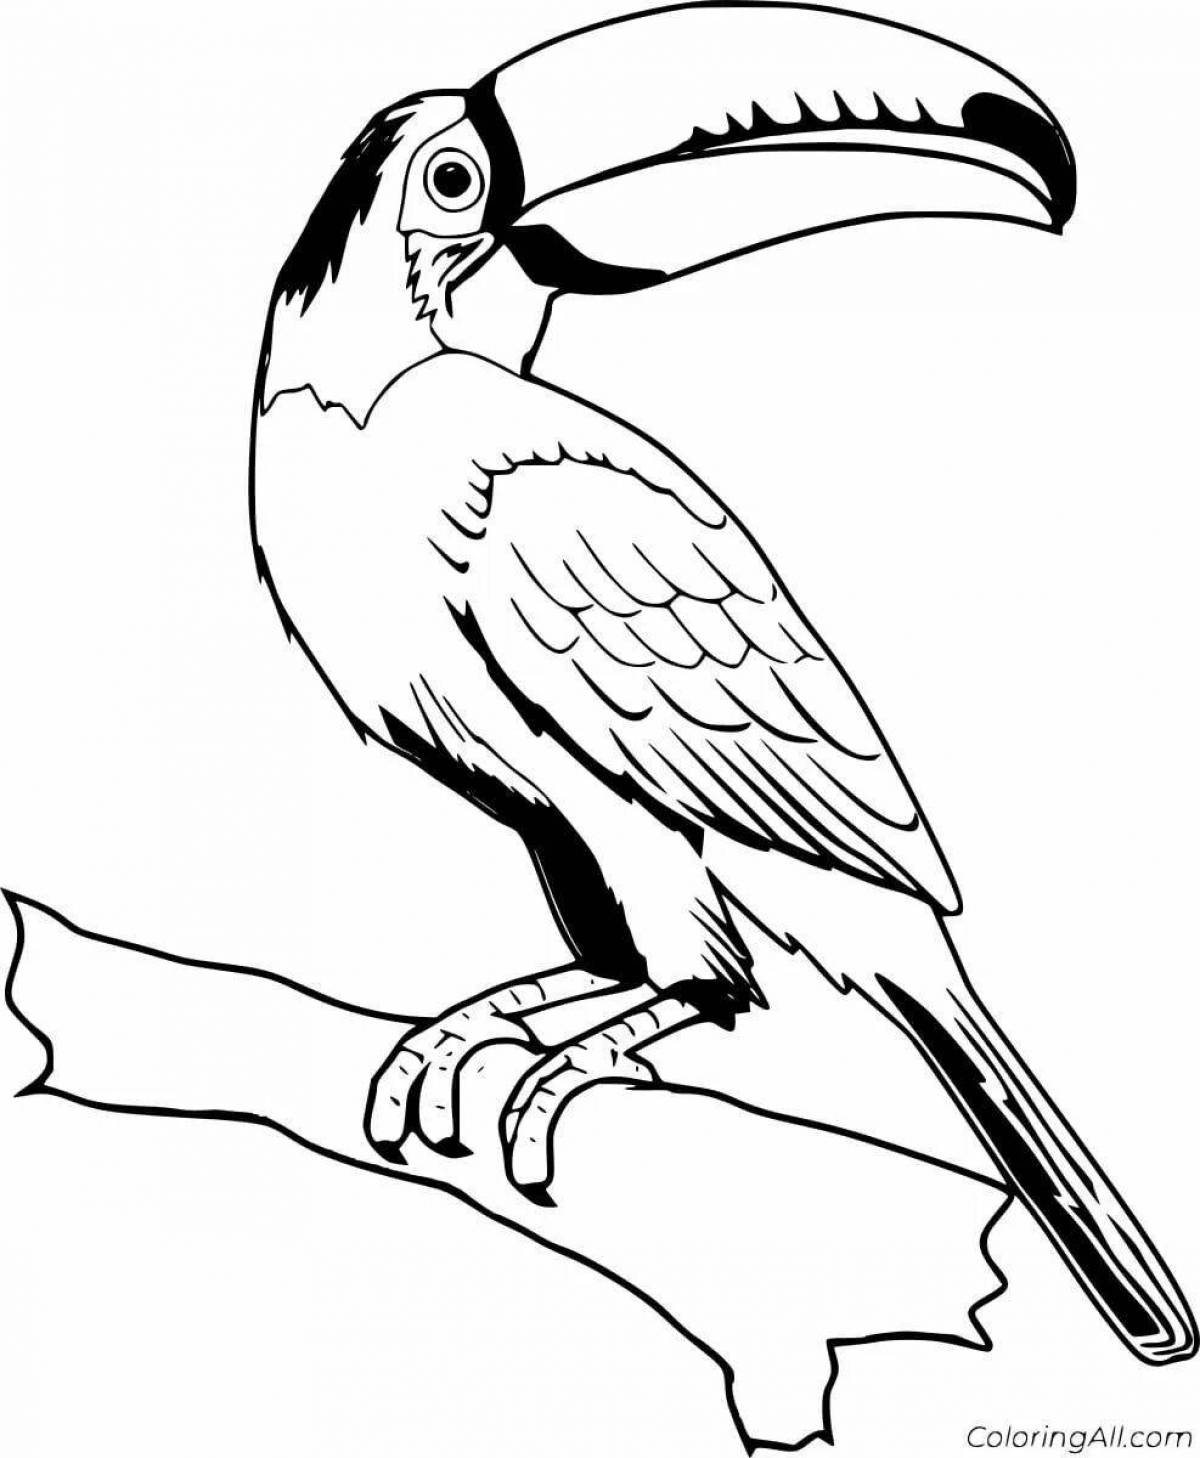 Great toucan coloring book for kids